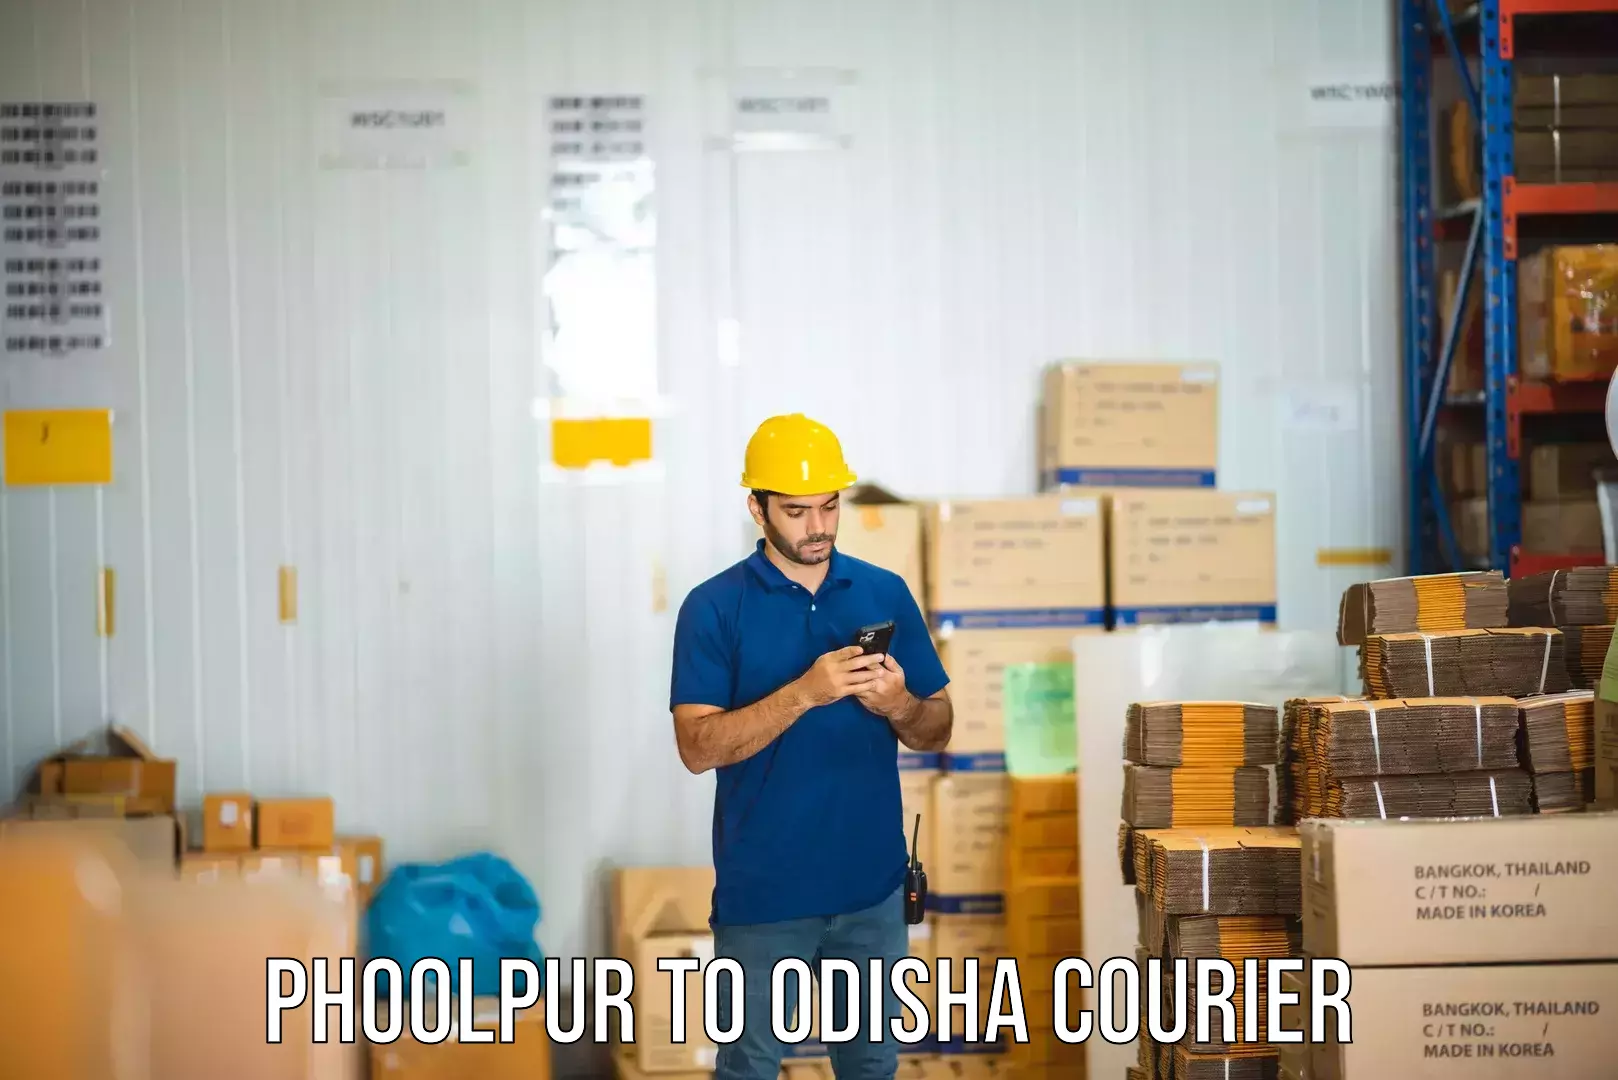 Sustainable shipping practices in Phoolpur to Odisha